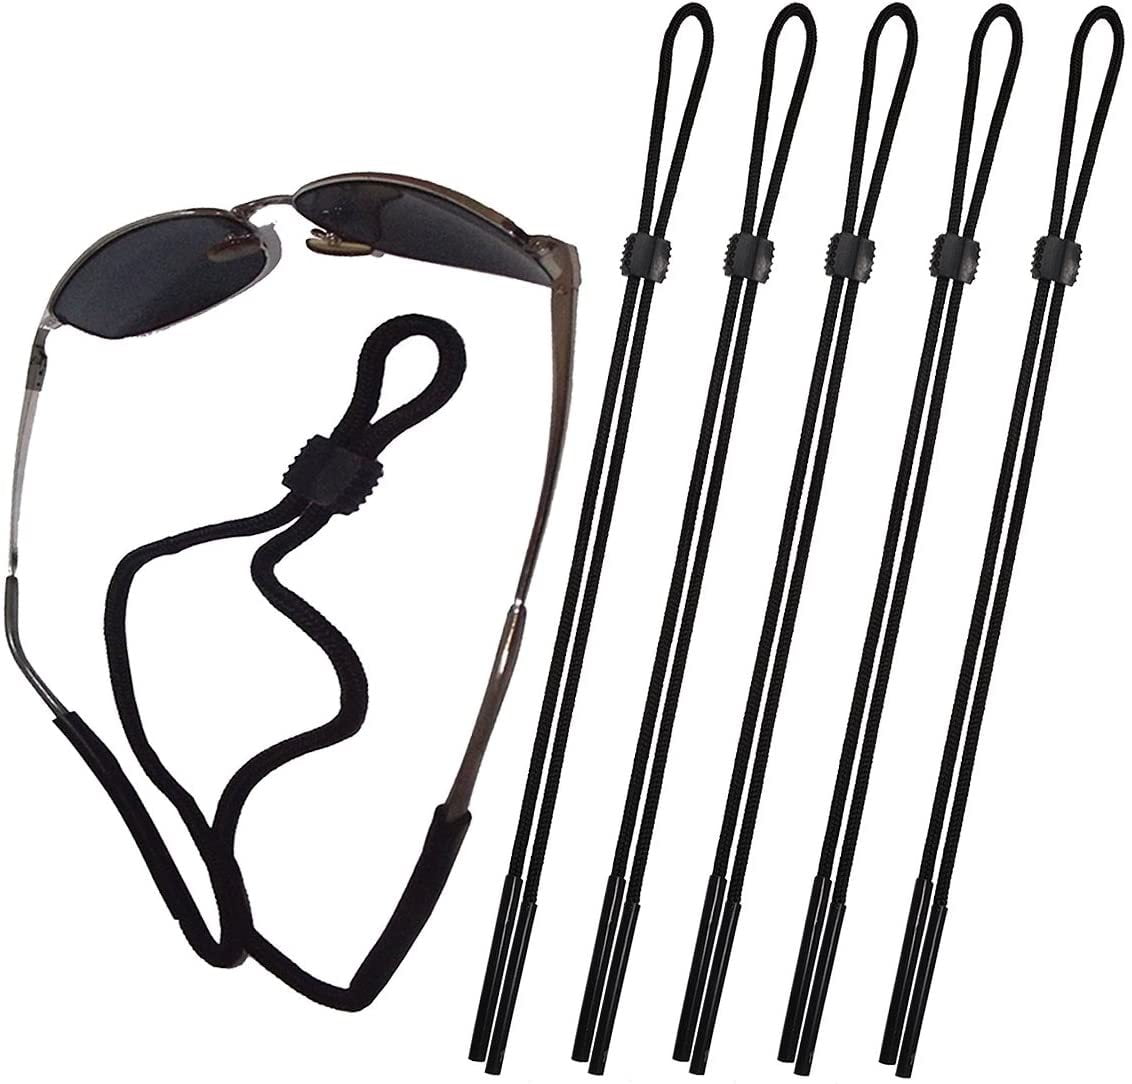 Unisex Safety Glasses String for Men and Women Sports Glasses Chain Eyewear Retainer 8 Pcs Sunglass Straps Glasses Strap